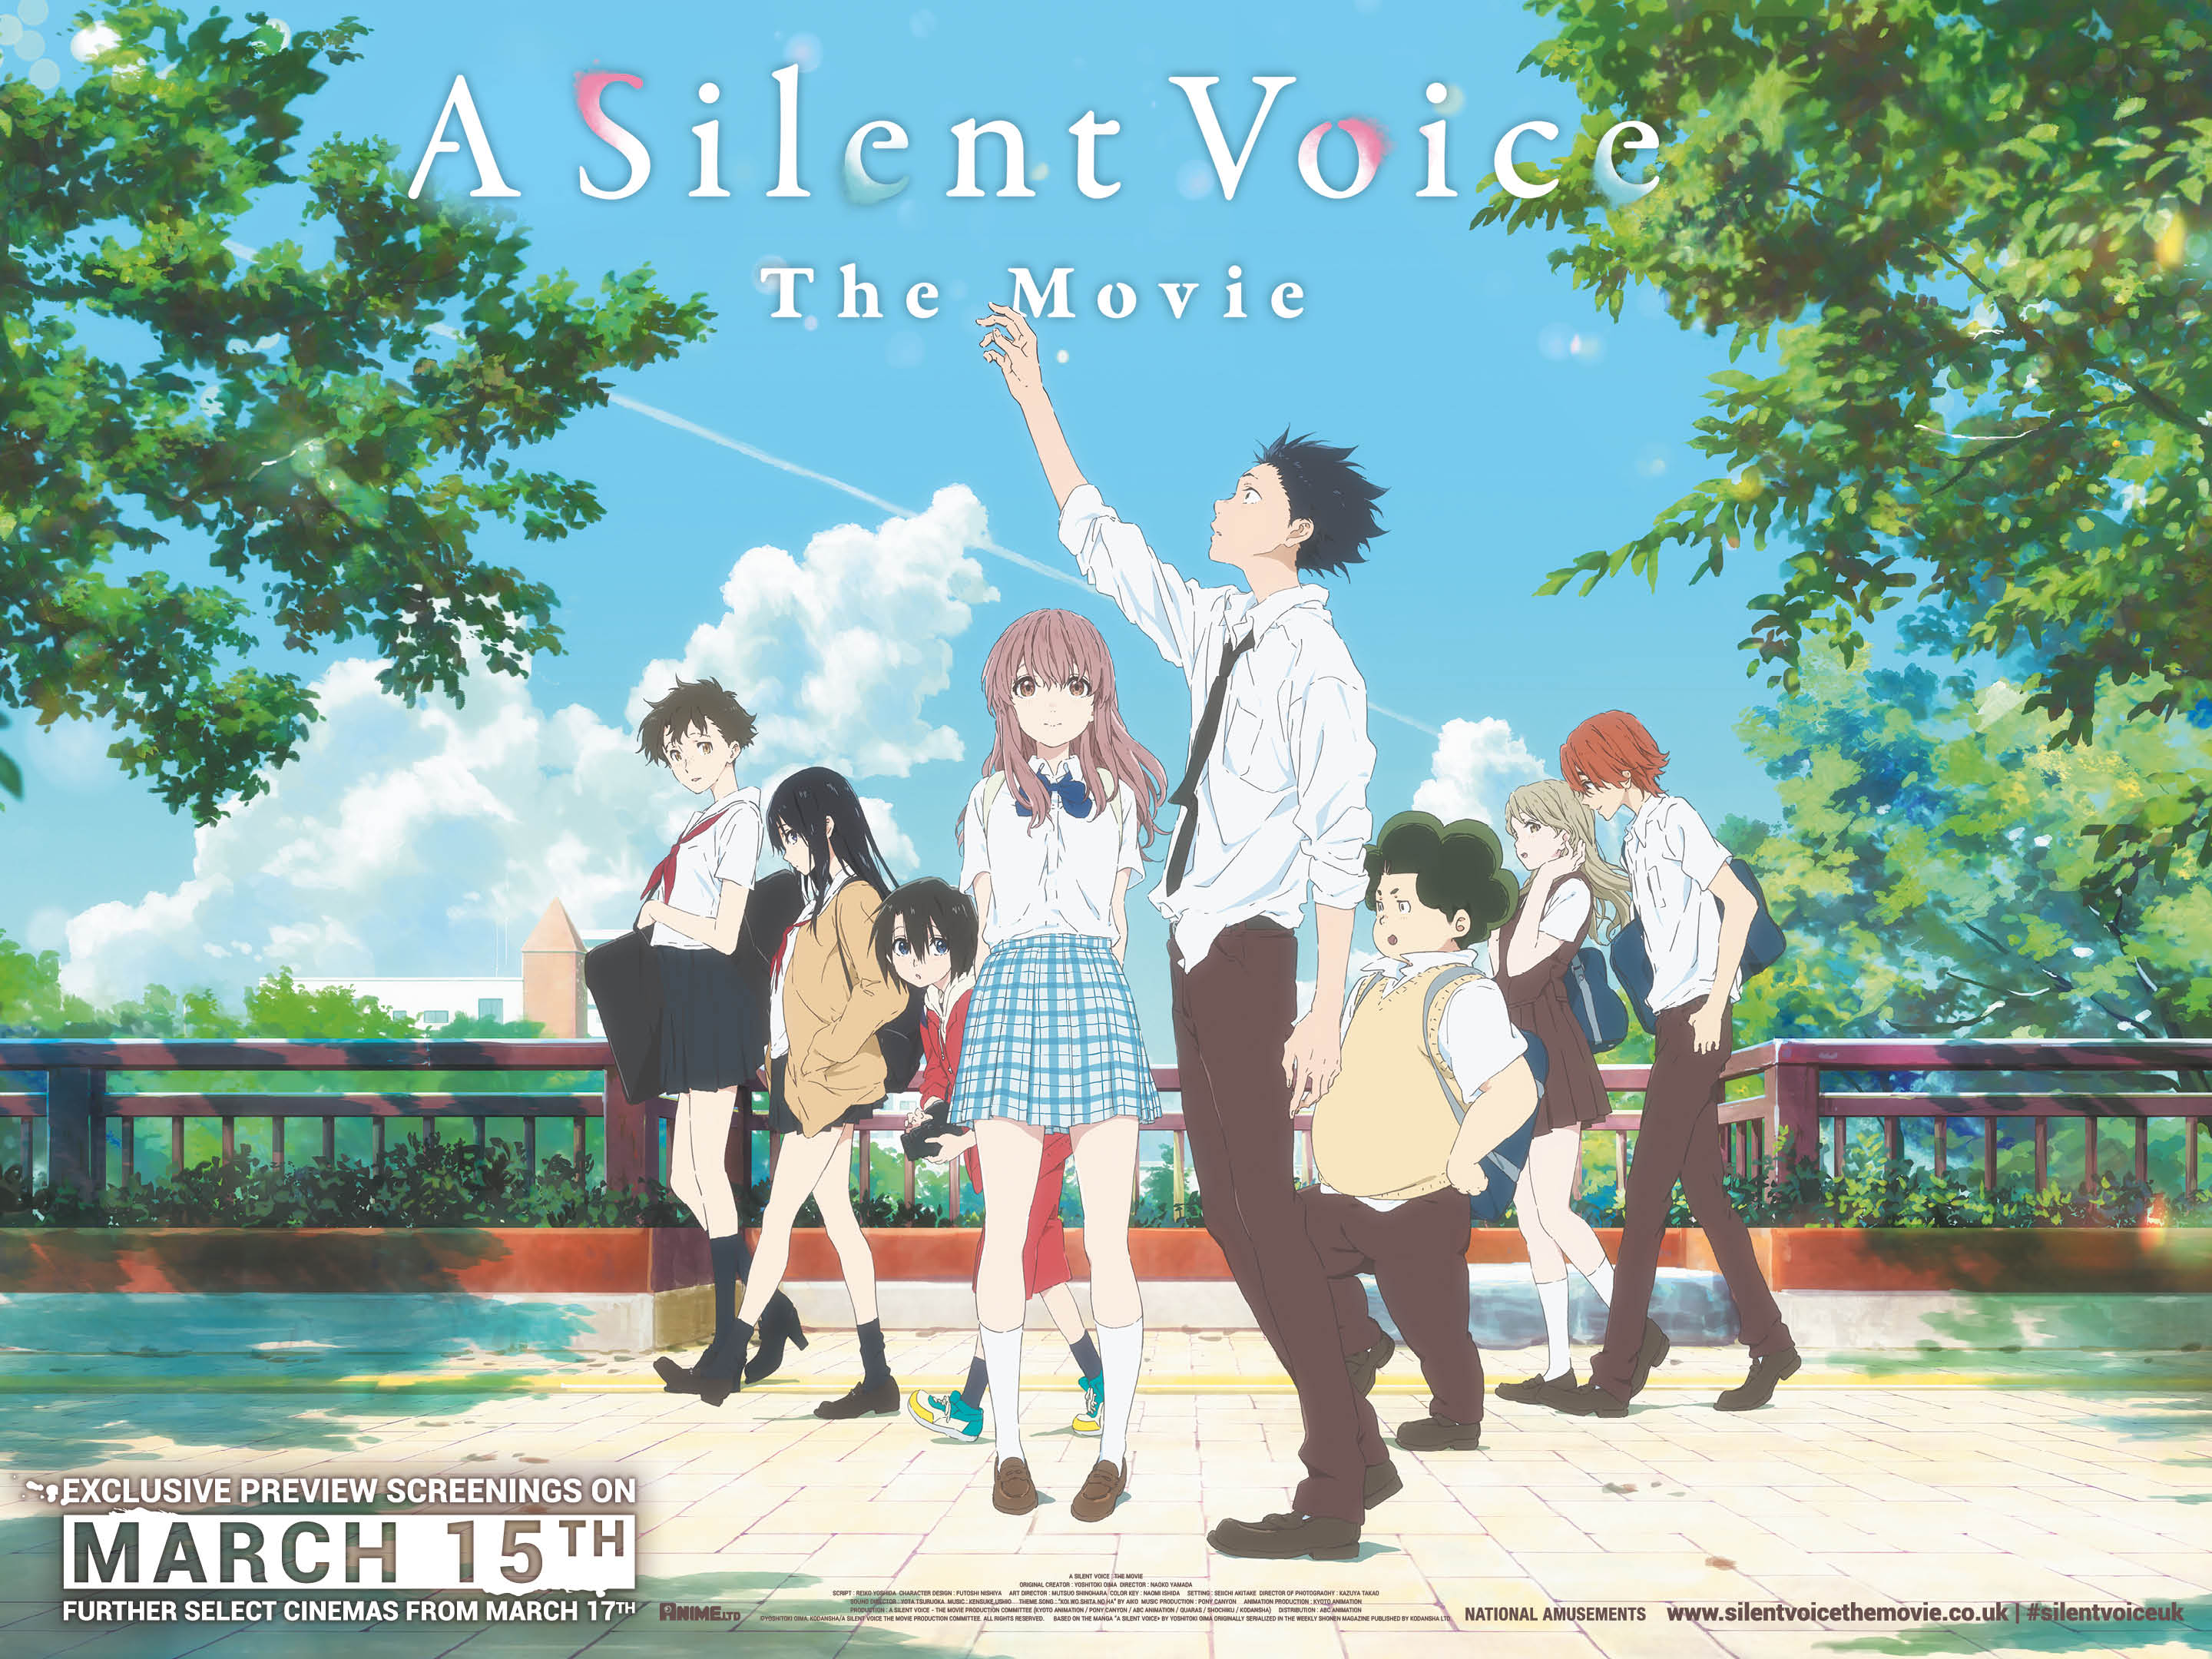 Should you read A Silent Voice manga after watching the movie?